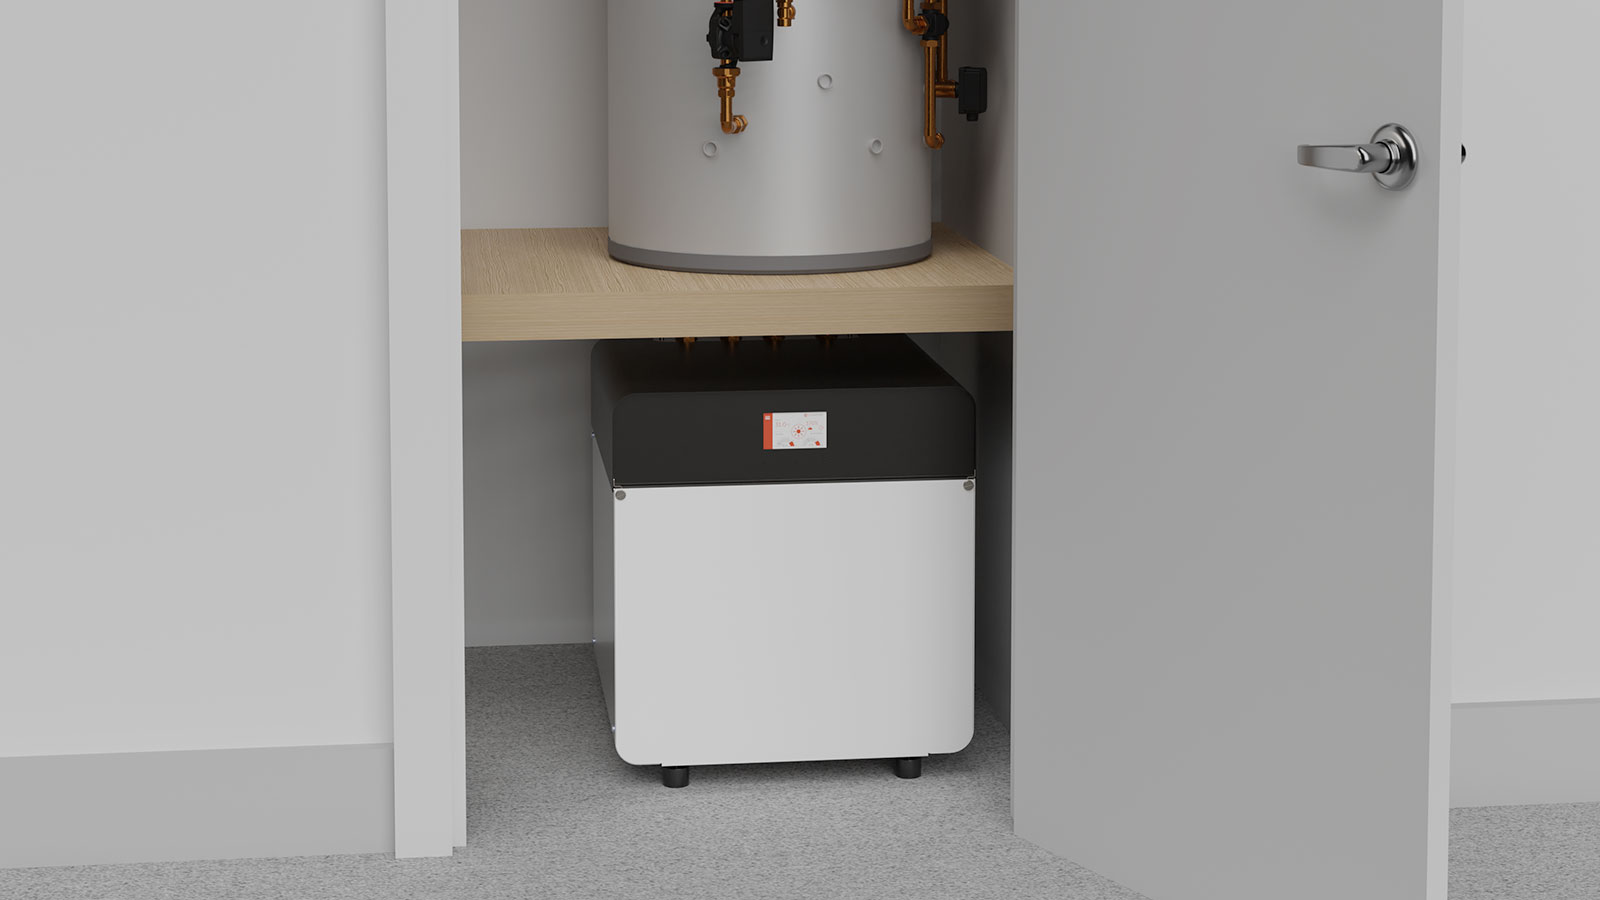 Kensa has announced a new compact and efficient ground source heat pump, dubbed the Shoebox NX